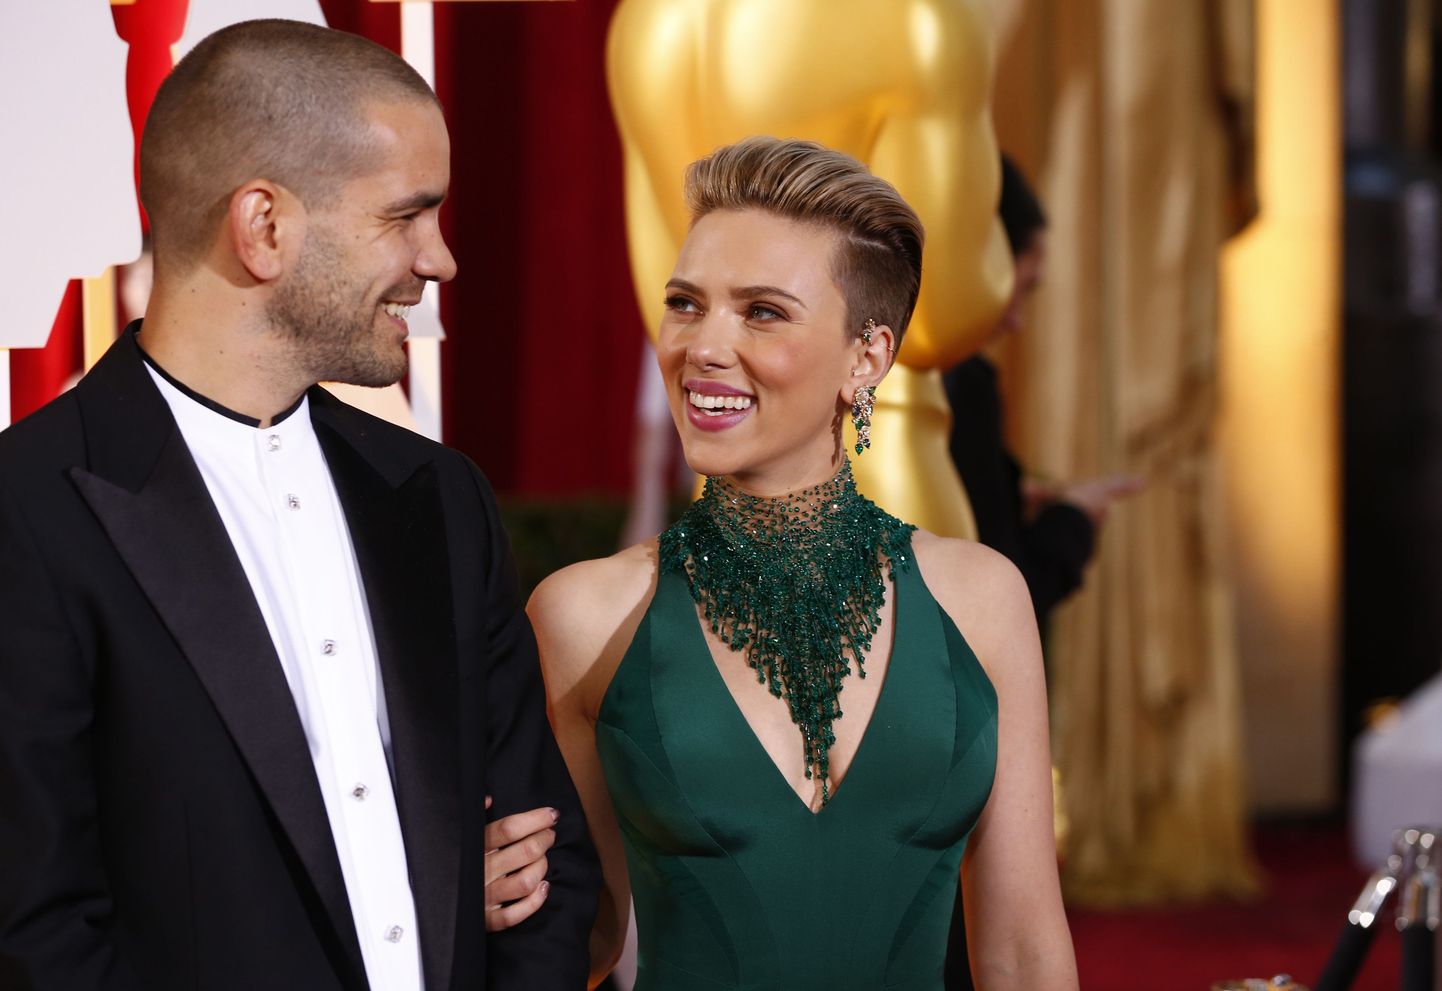 Actress Scarlett Johansson wears a Versace dress as she and her husband Romain Dauriac arrive at the 87th Academy Awards in Hollywood, California February 22, 2015.   REUTERS/Lucas Jackson (UNITED STATES TAGS:ENTERTAINMENT) (OSCARS-ARRIVALS)